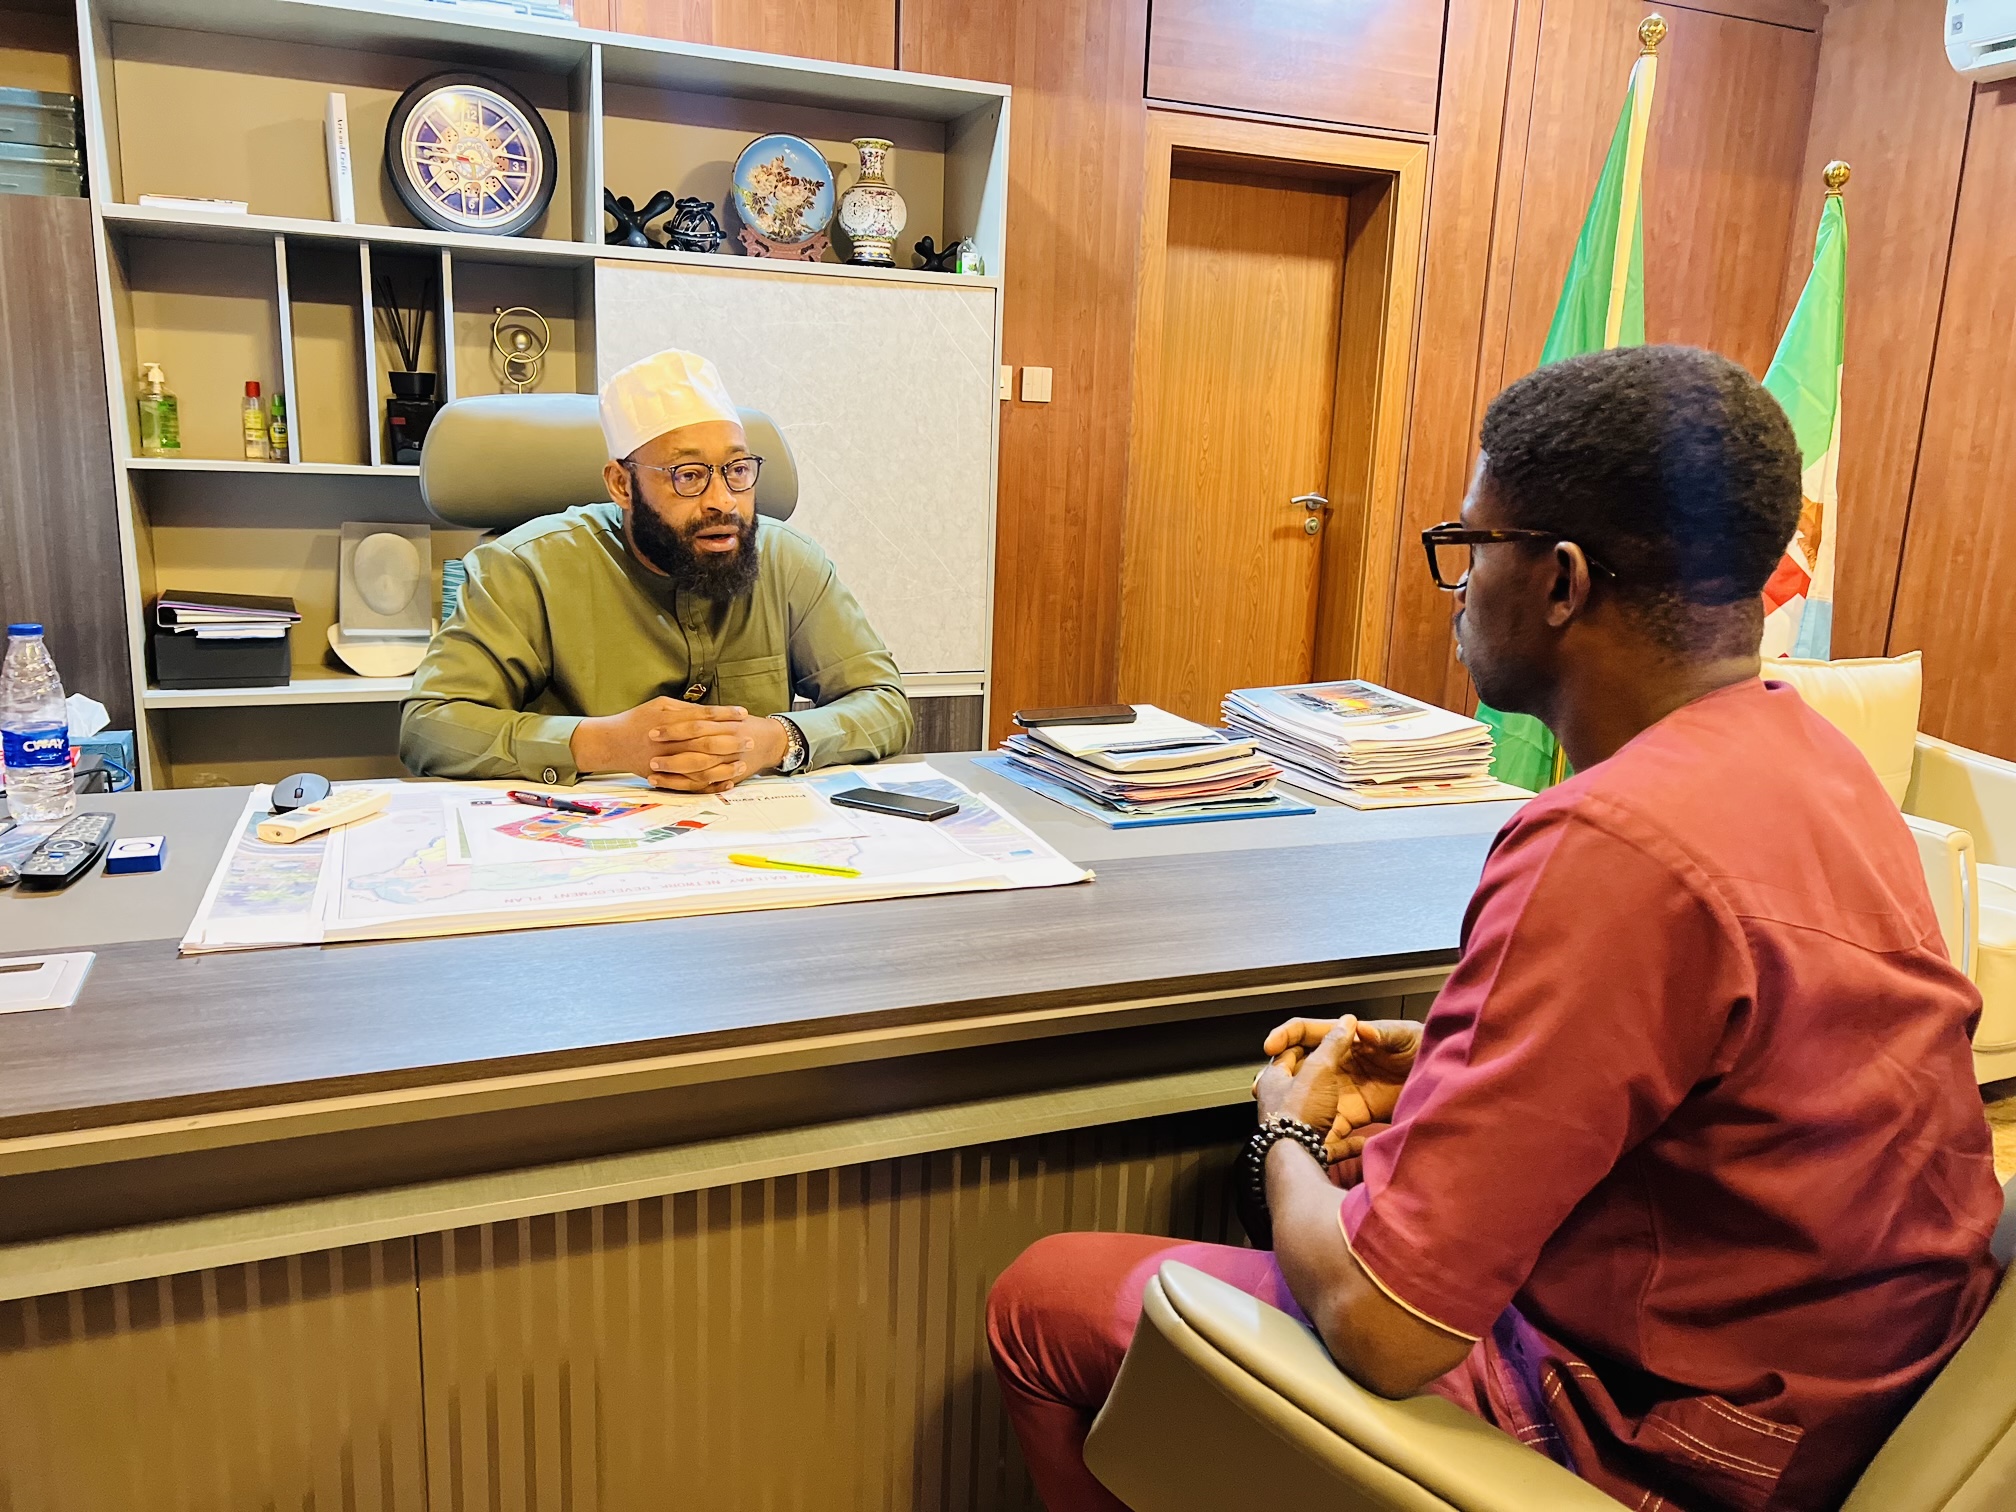 TheCable reporter interviewing Bago in his office